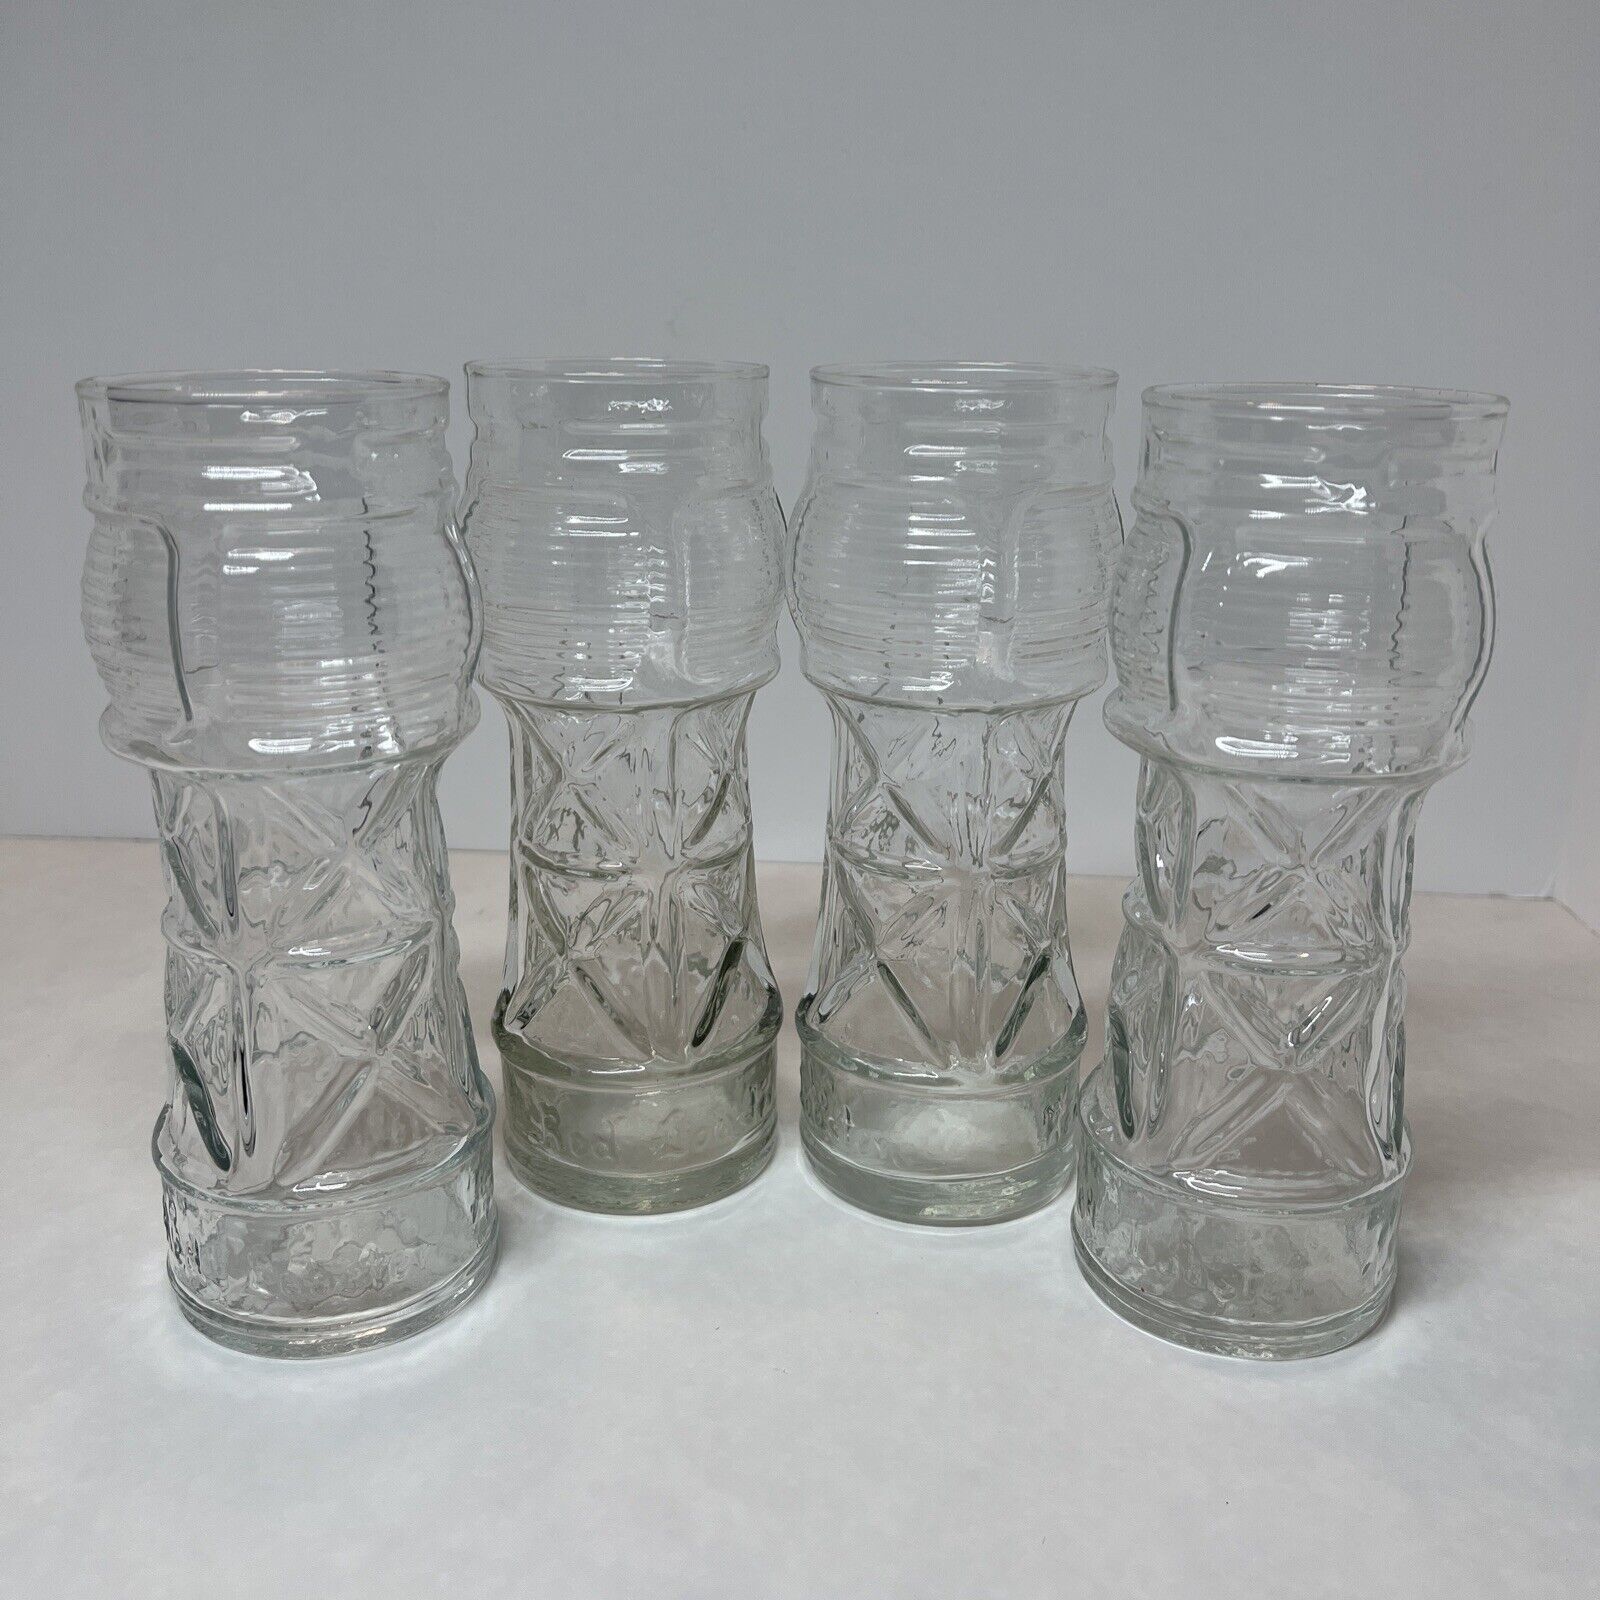 Vintage Red Lobster Lighthouse Drinking Glass Collectible Souvenir Set Of 4